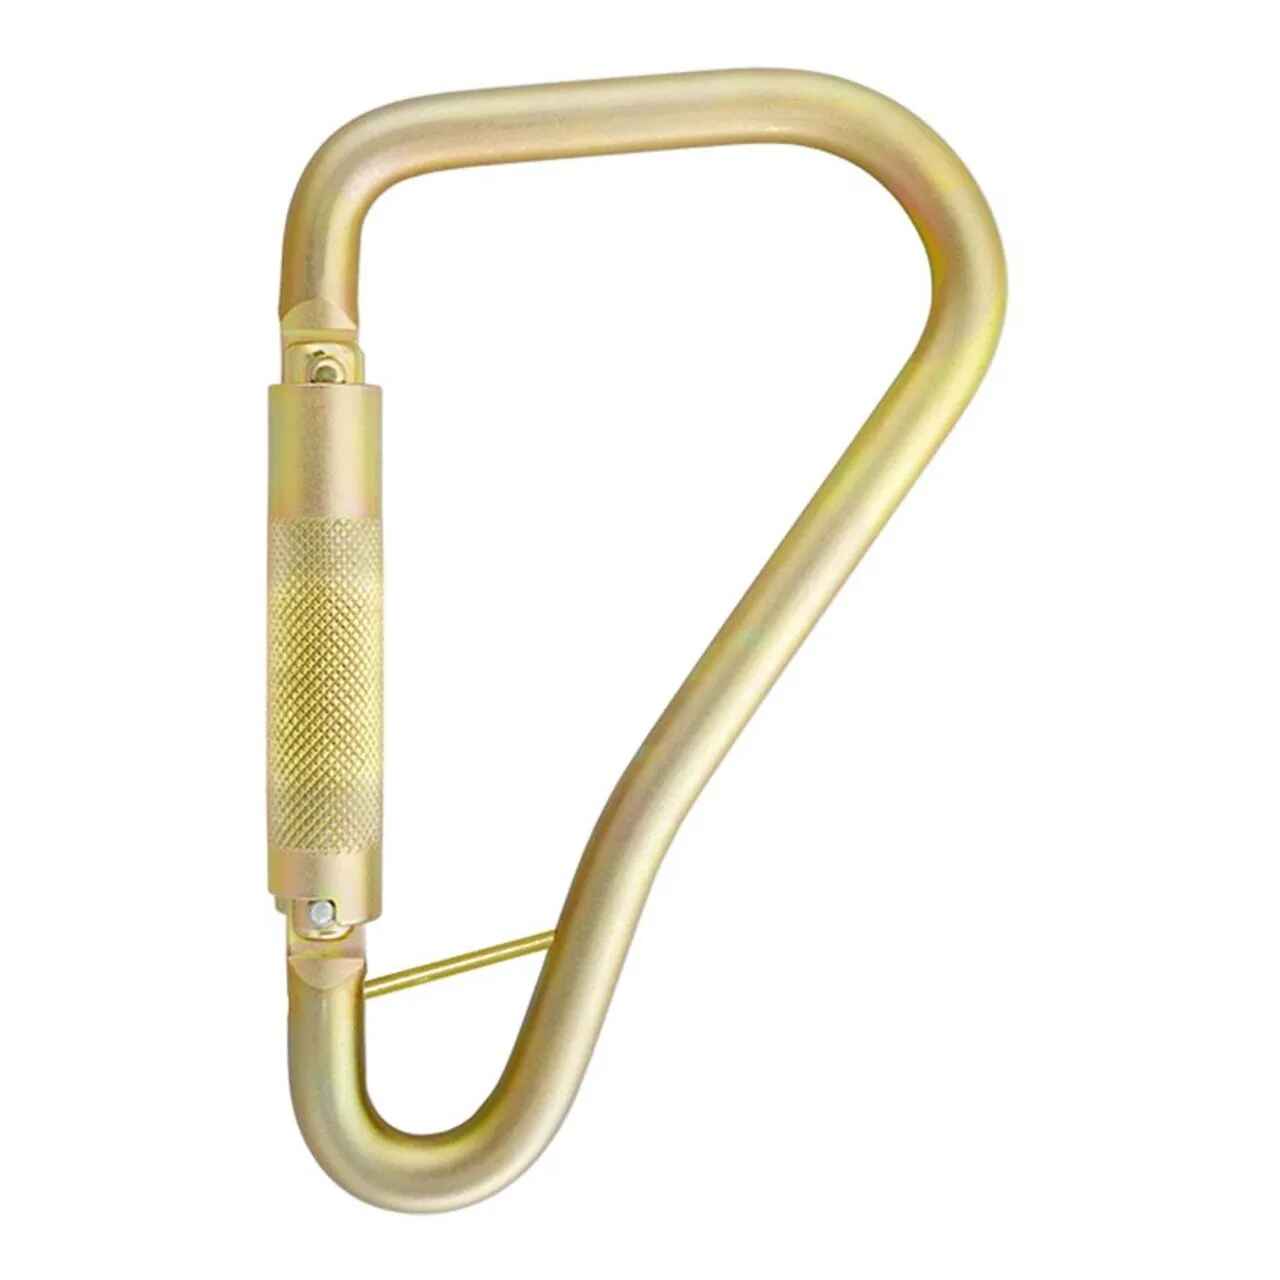 forged scaffolding hook, forged scaffolding hook Suppliers and  Manufacturers at